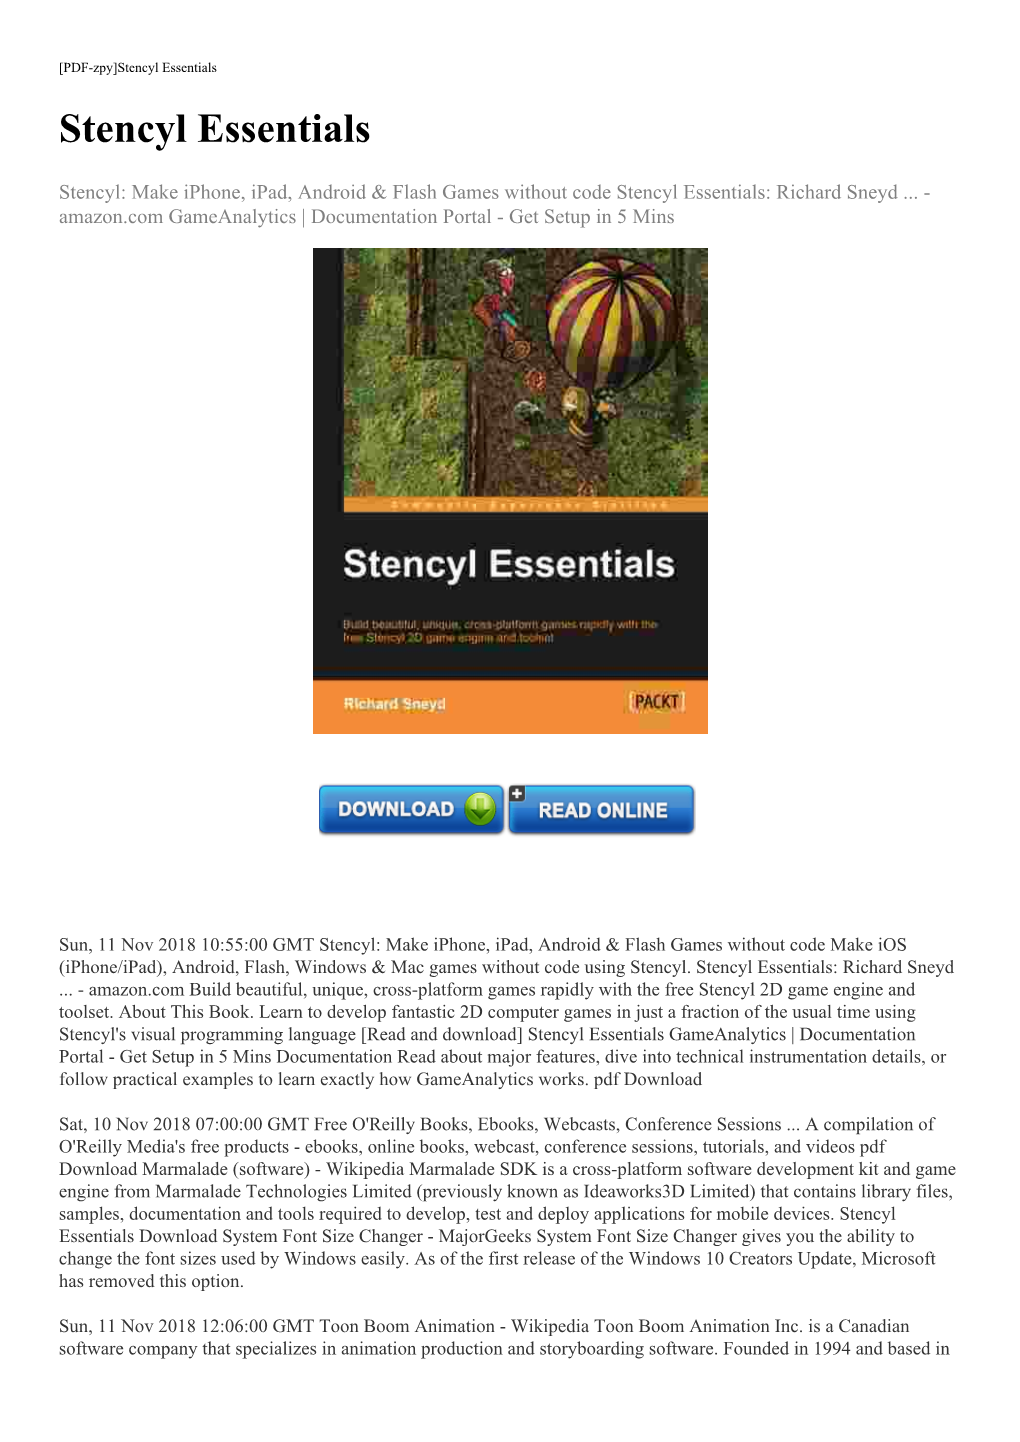 [Read and Download] Stencyl Essentials